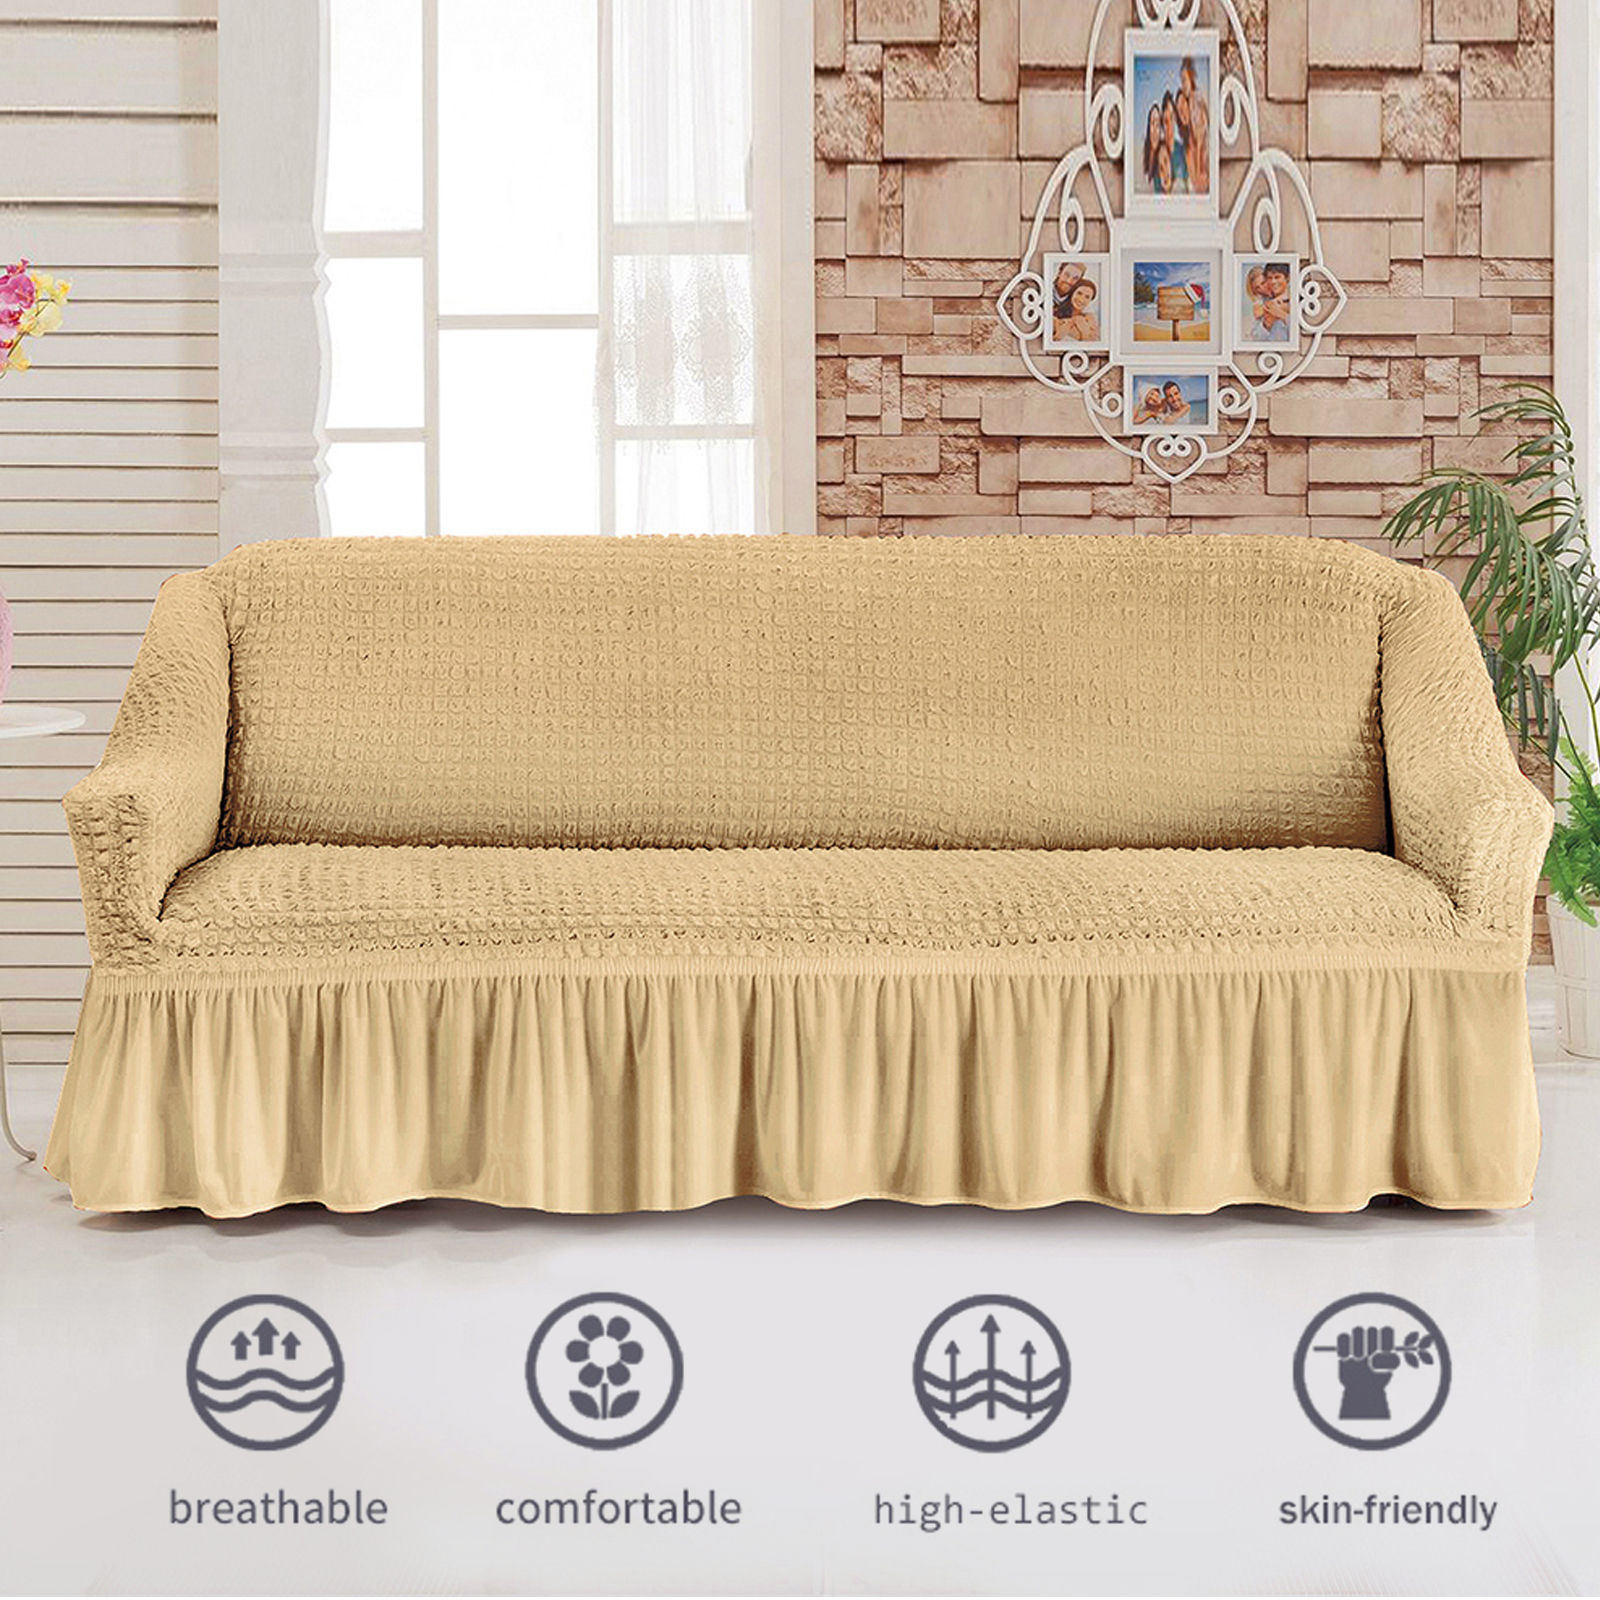 Stretch Sofa Slipcover, 3 Seater Sofa Slipcovers With Skirt With Armless Soft Sofa Cover Elastic Straps Sofa Slipcover For Living Room Kids Pets-Yellow A-Medium